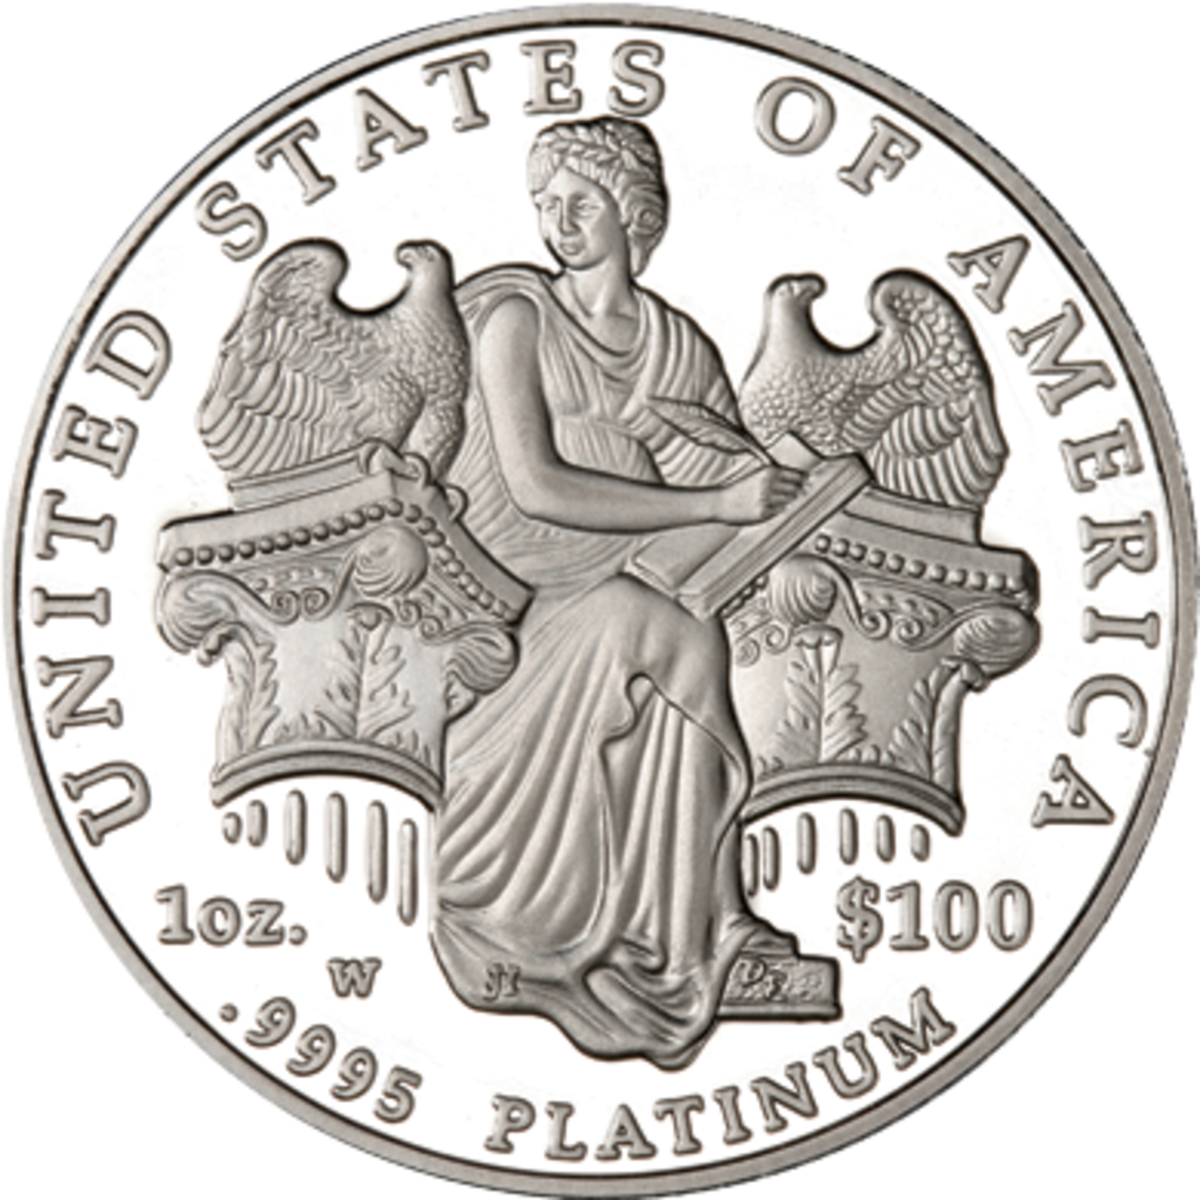 The 2006 reverse design shows Liberty seated, writing between two columns. (Image courtesy of Numismaster.com)